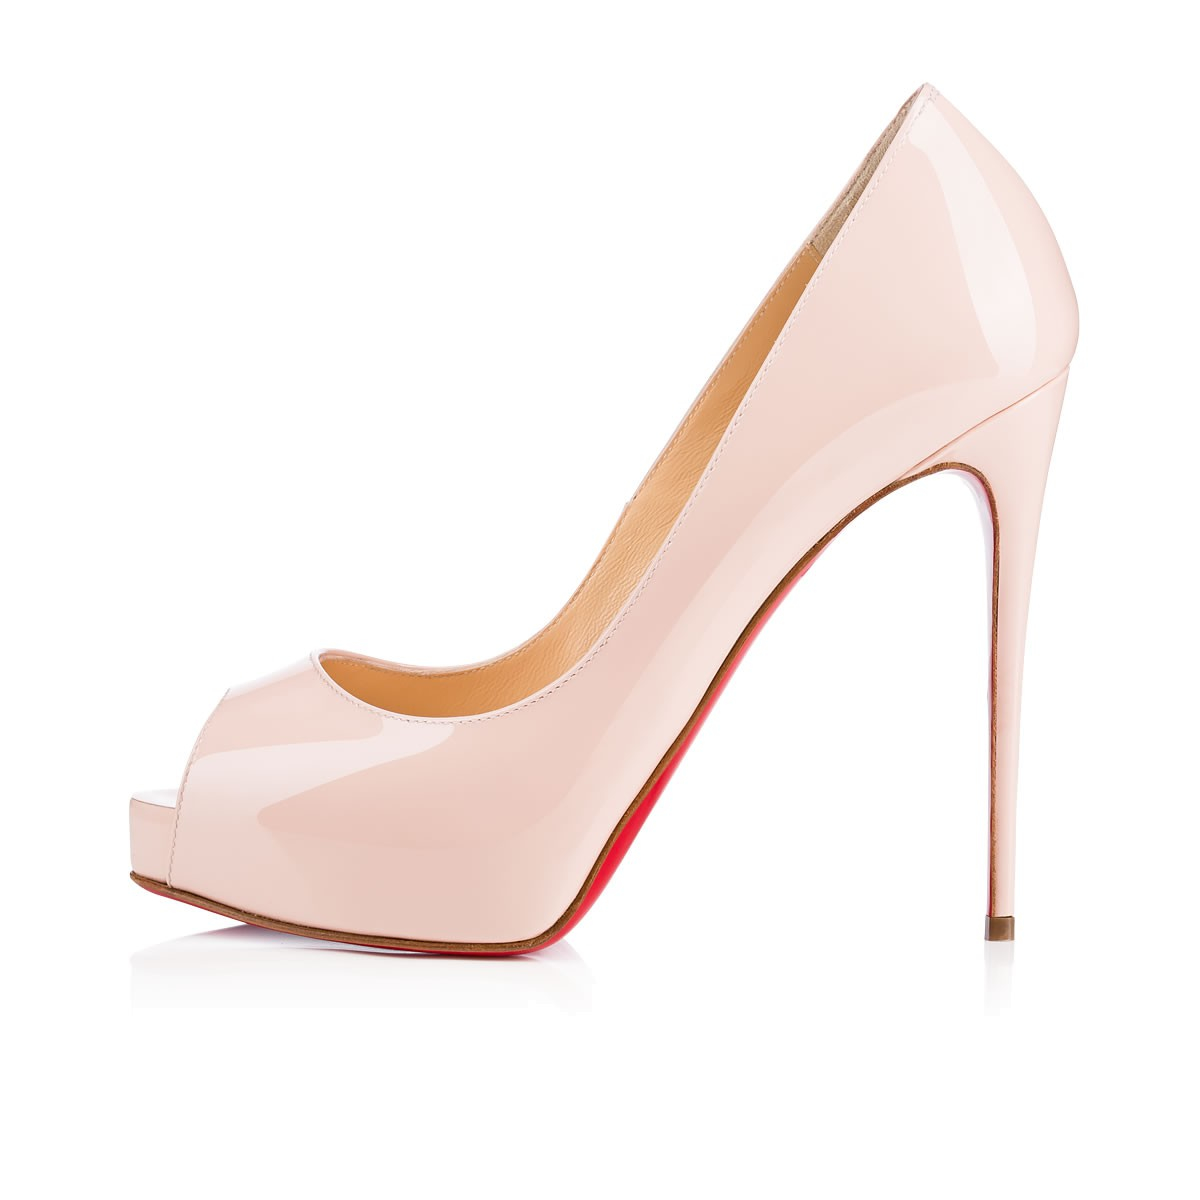 Christian louboutin Very Prive Patent Leather Platform Pumps in ...  